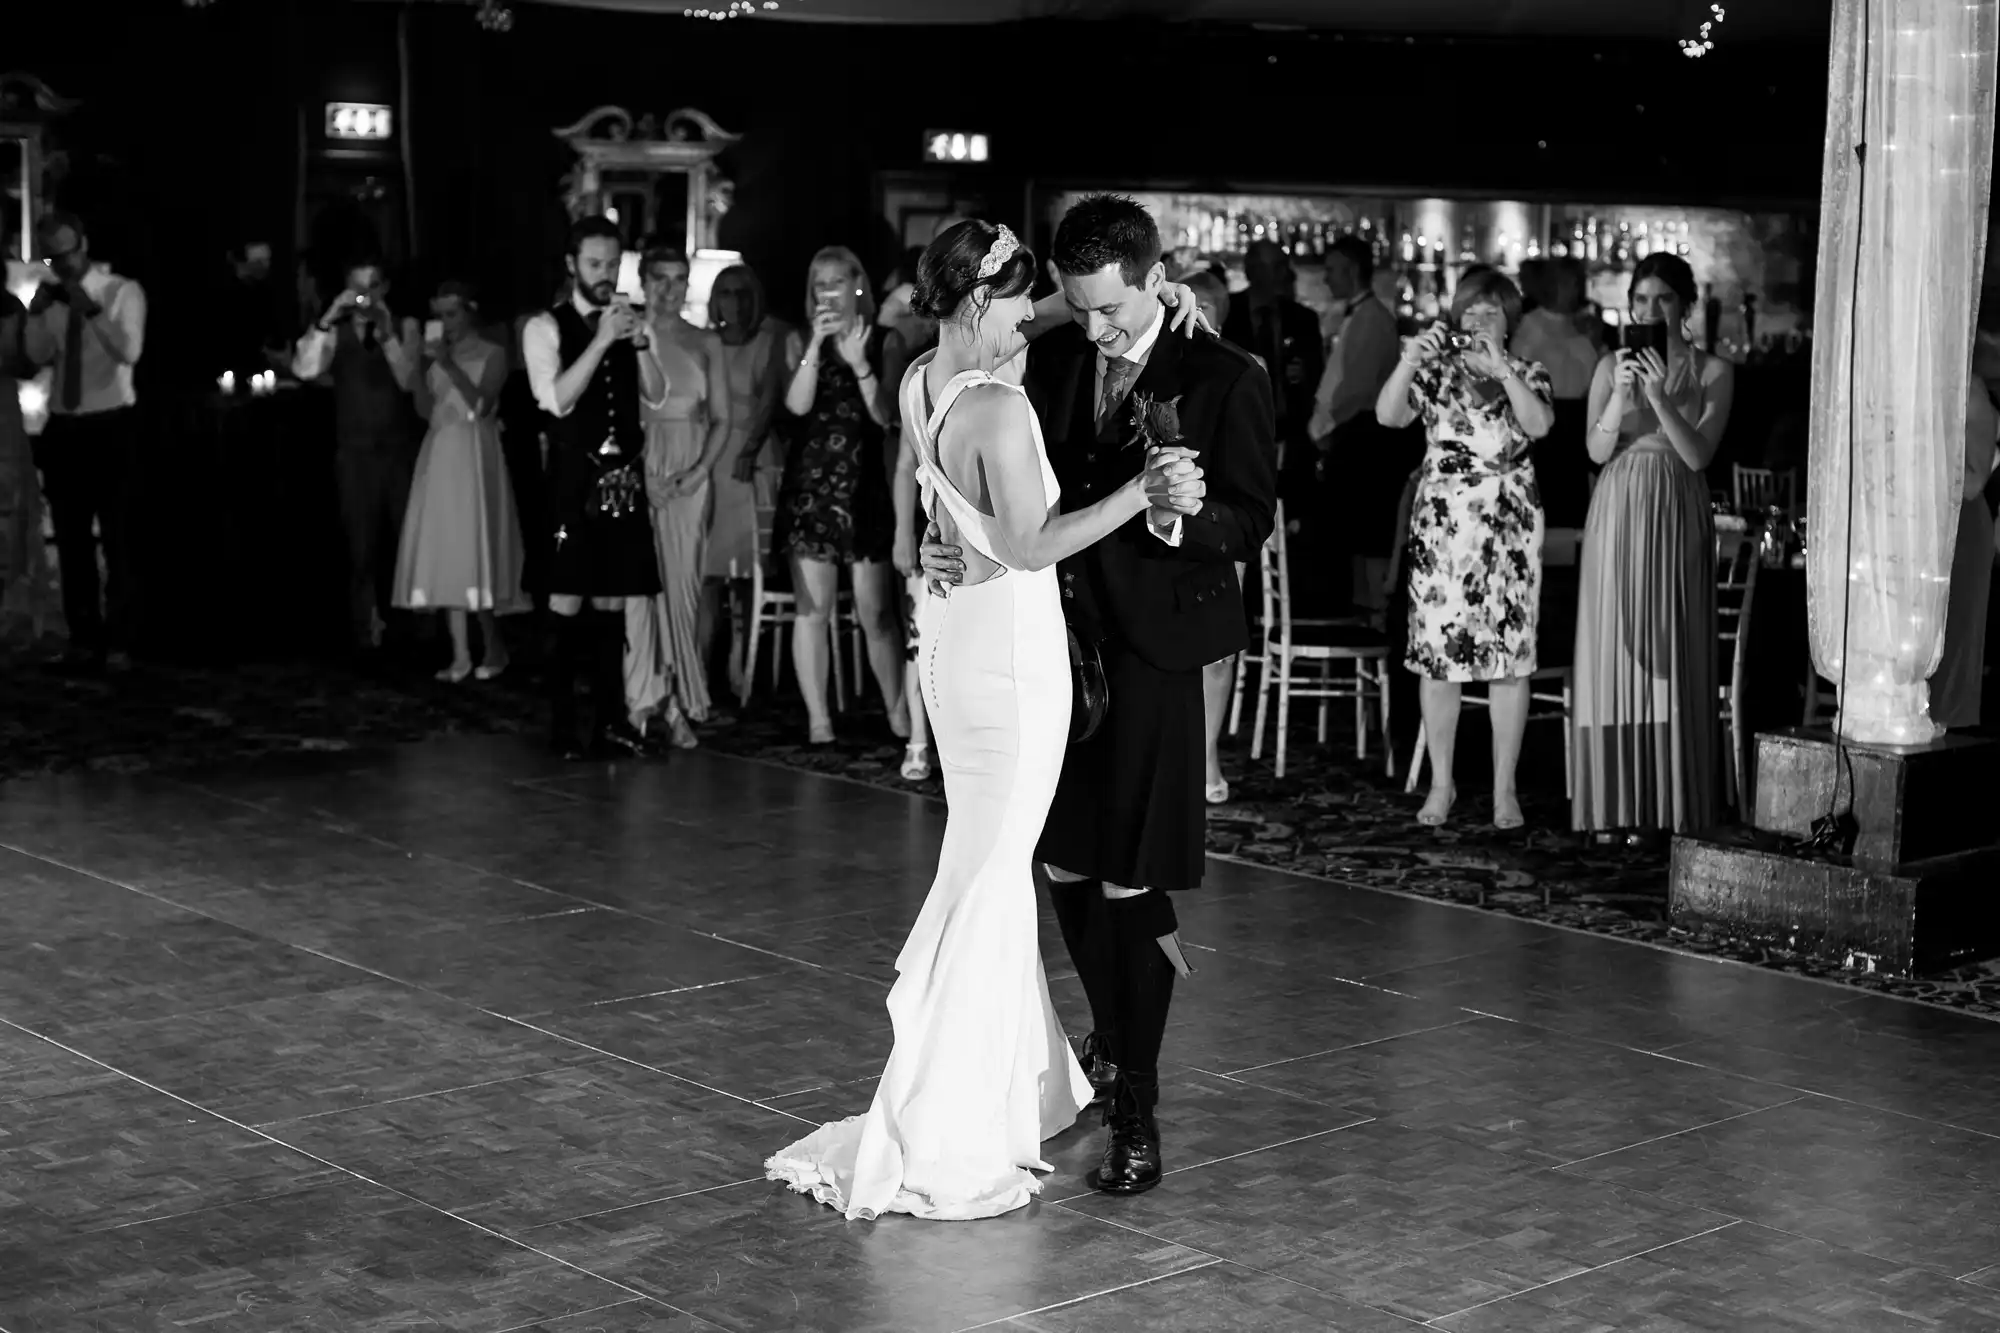 A couple dances closely together in the center of a ballroom while guests stand around them, taking photos and watching. The photo is in black and white.